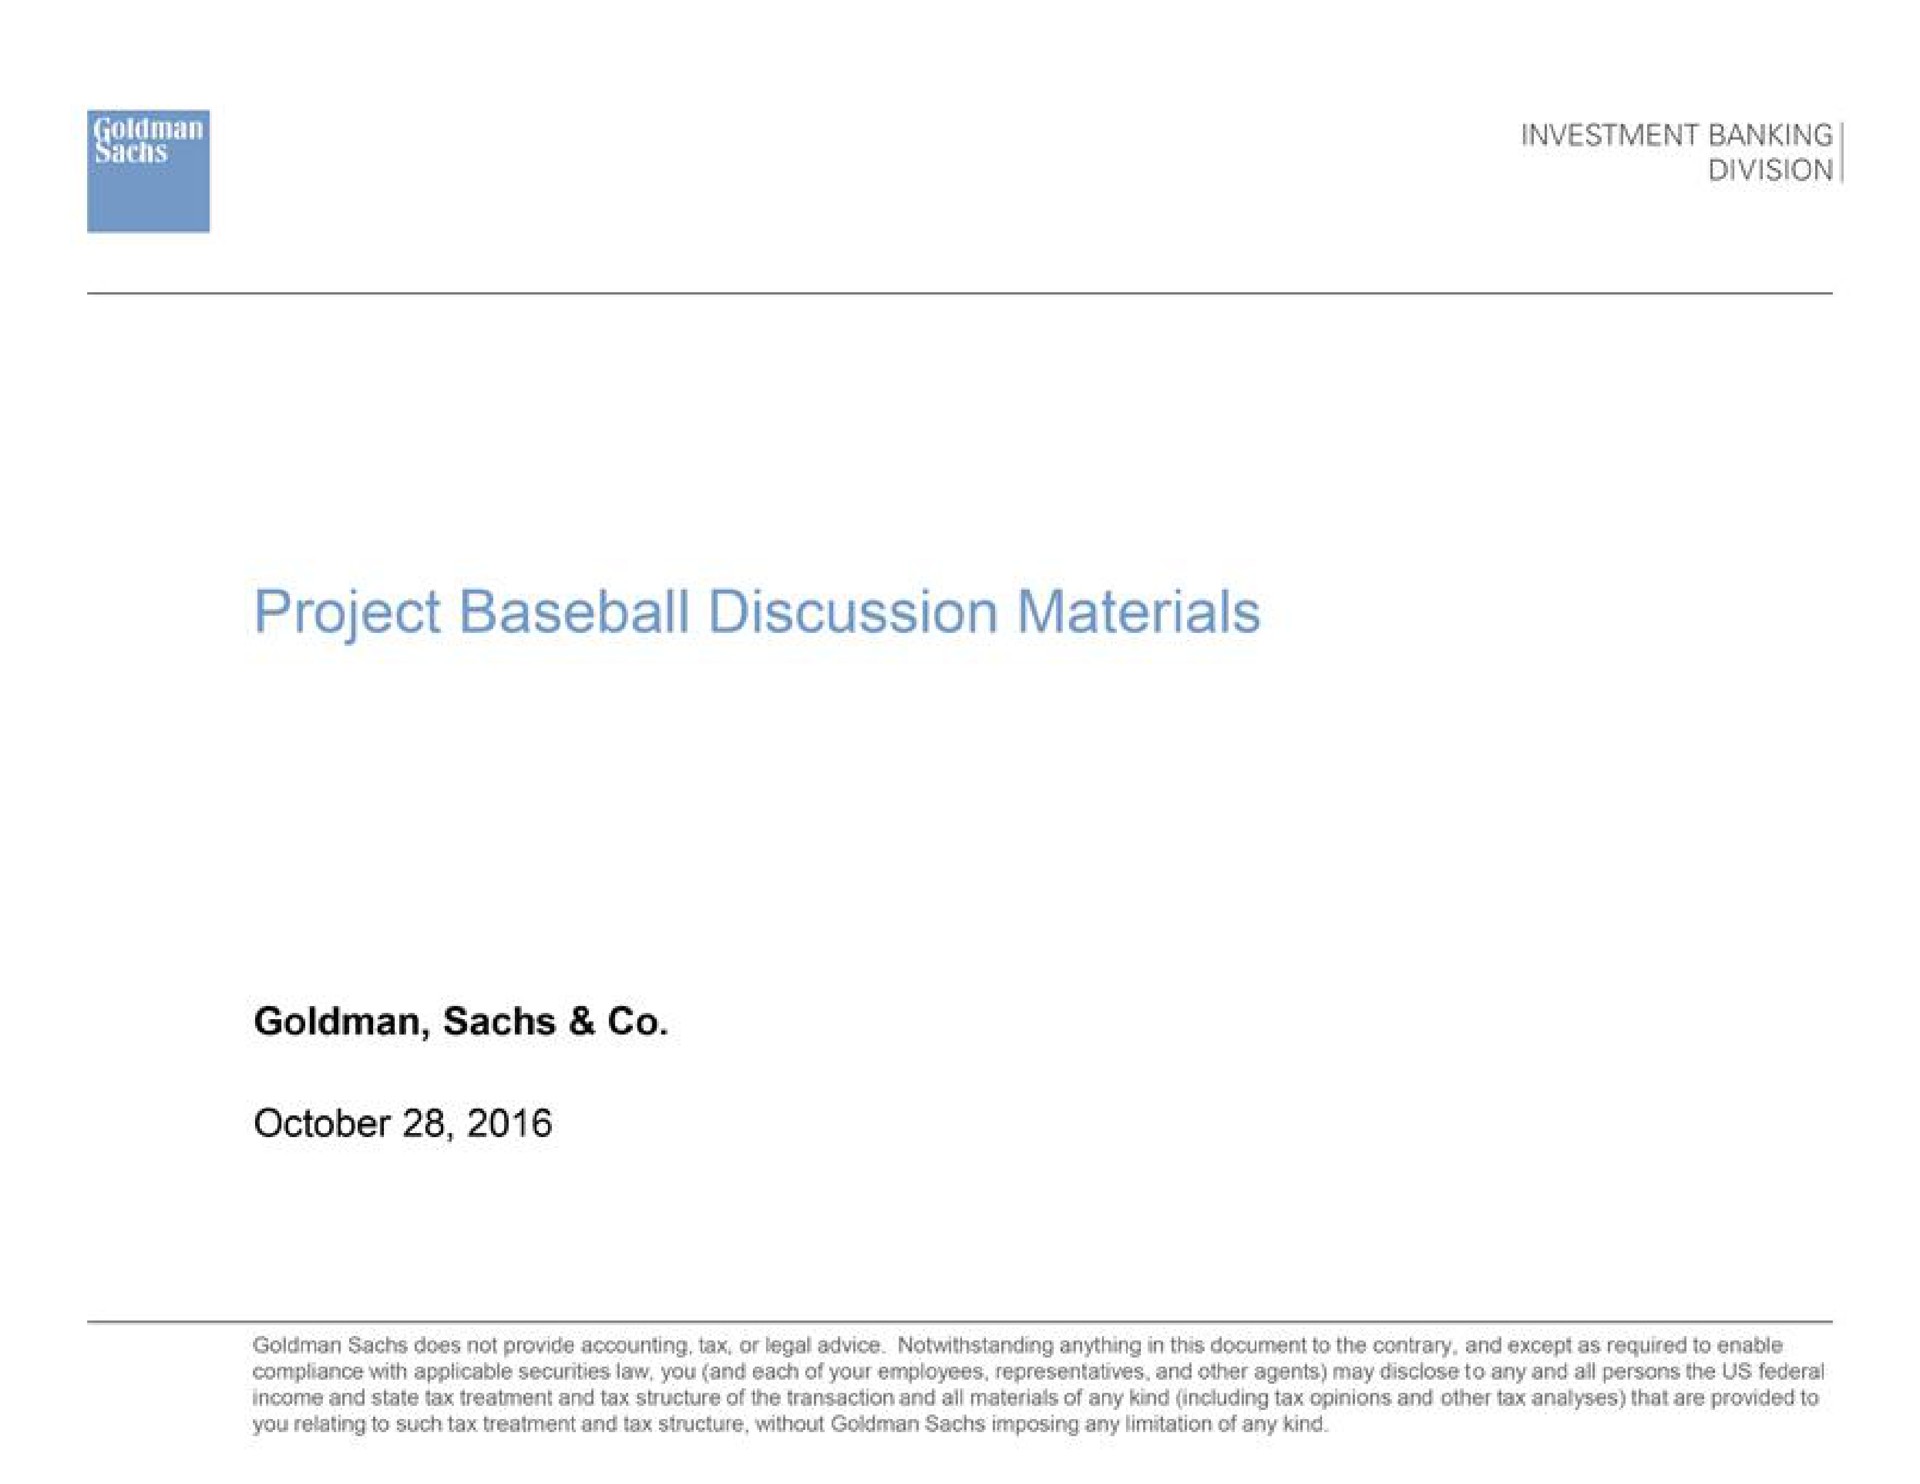 project baseball discussion materials | Goldman Sachs